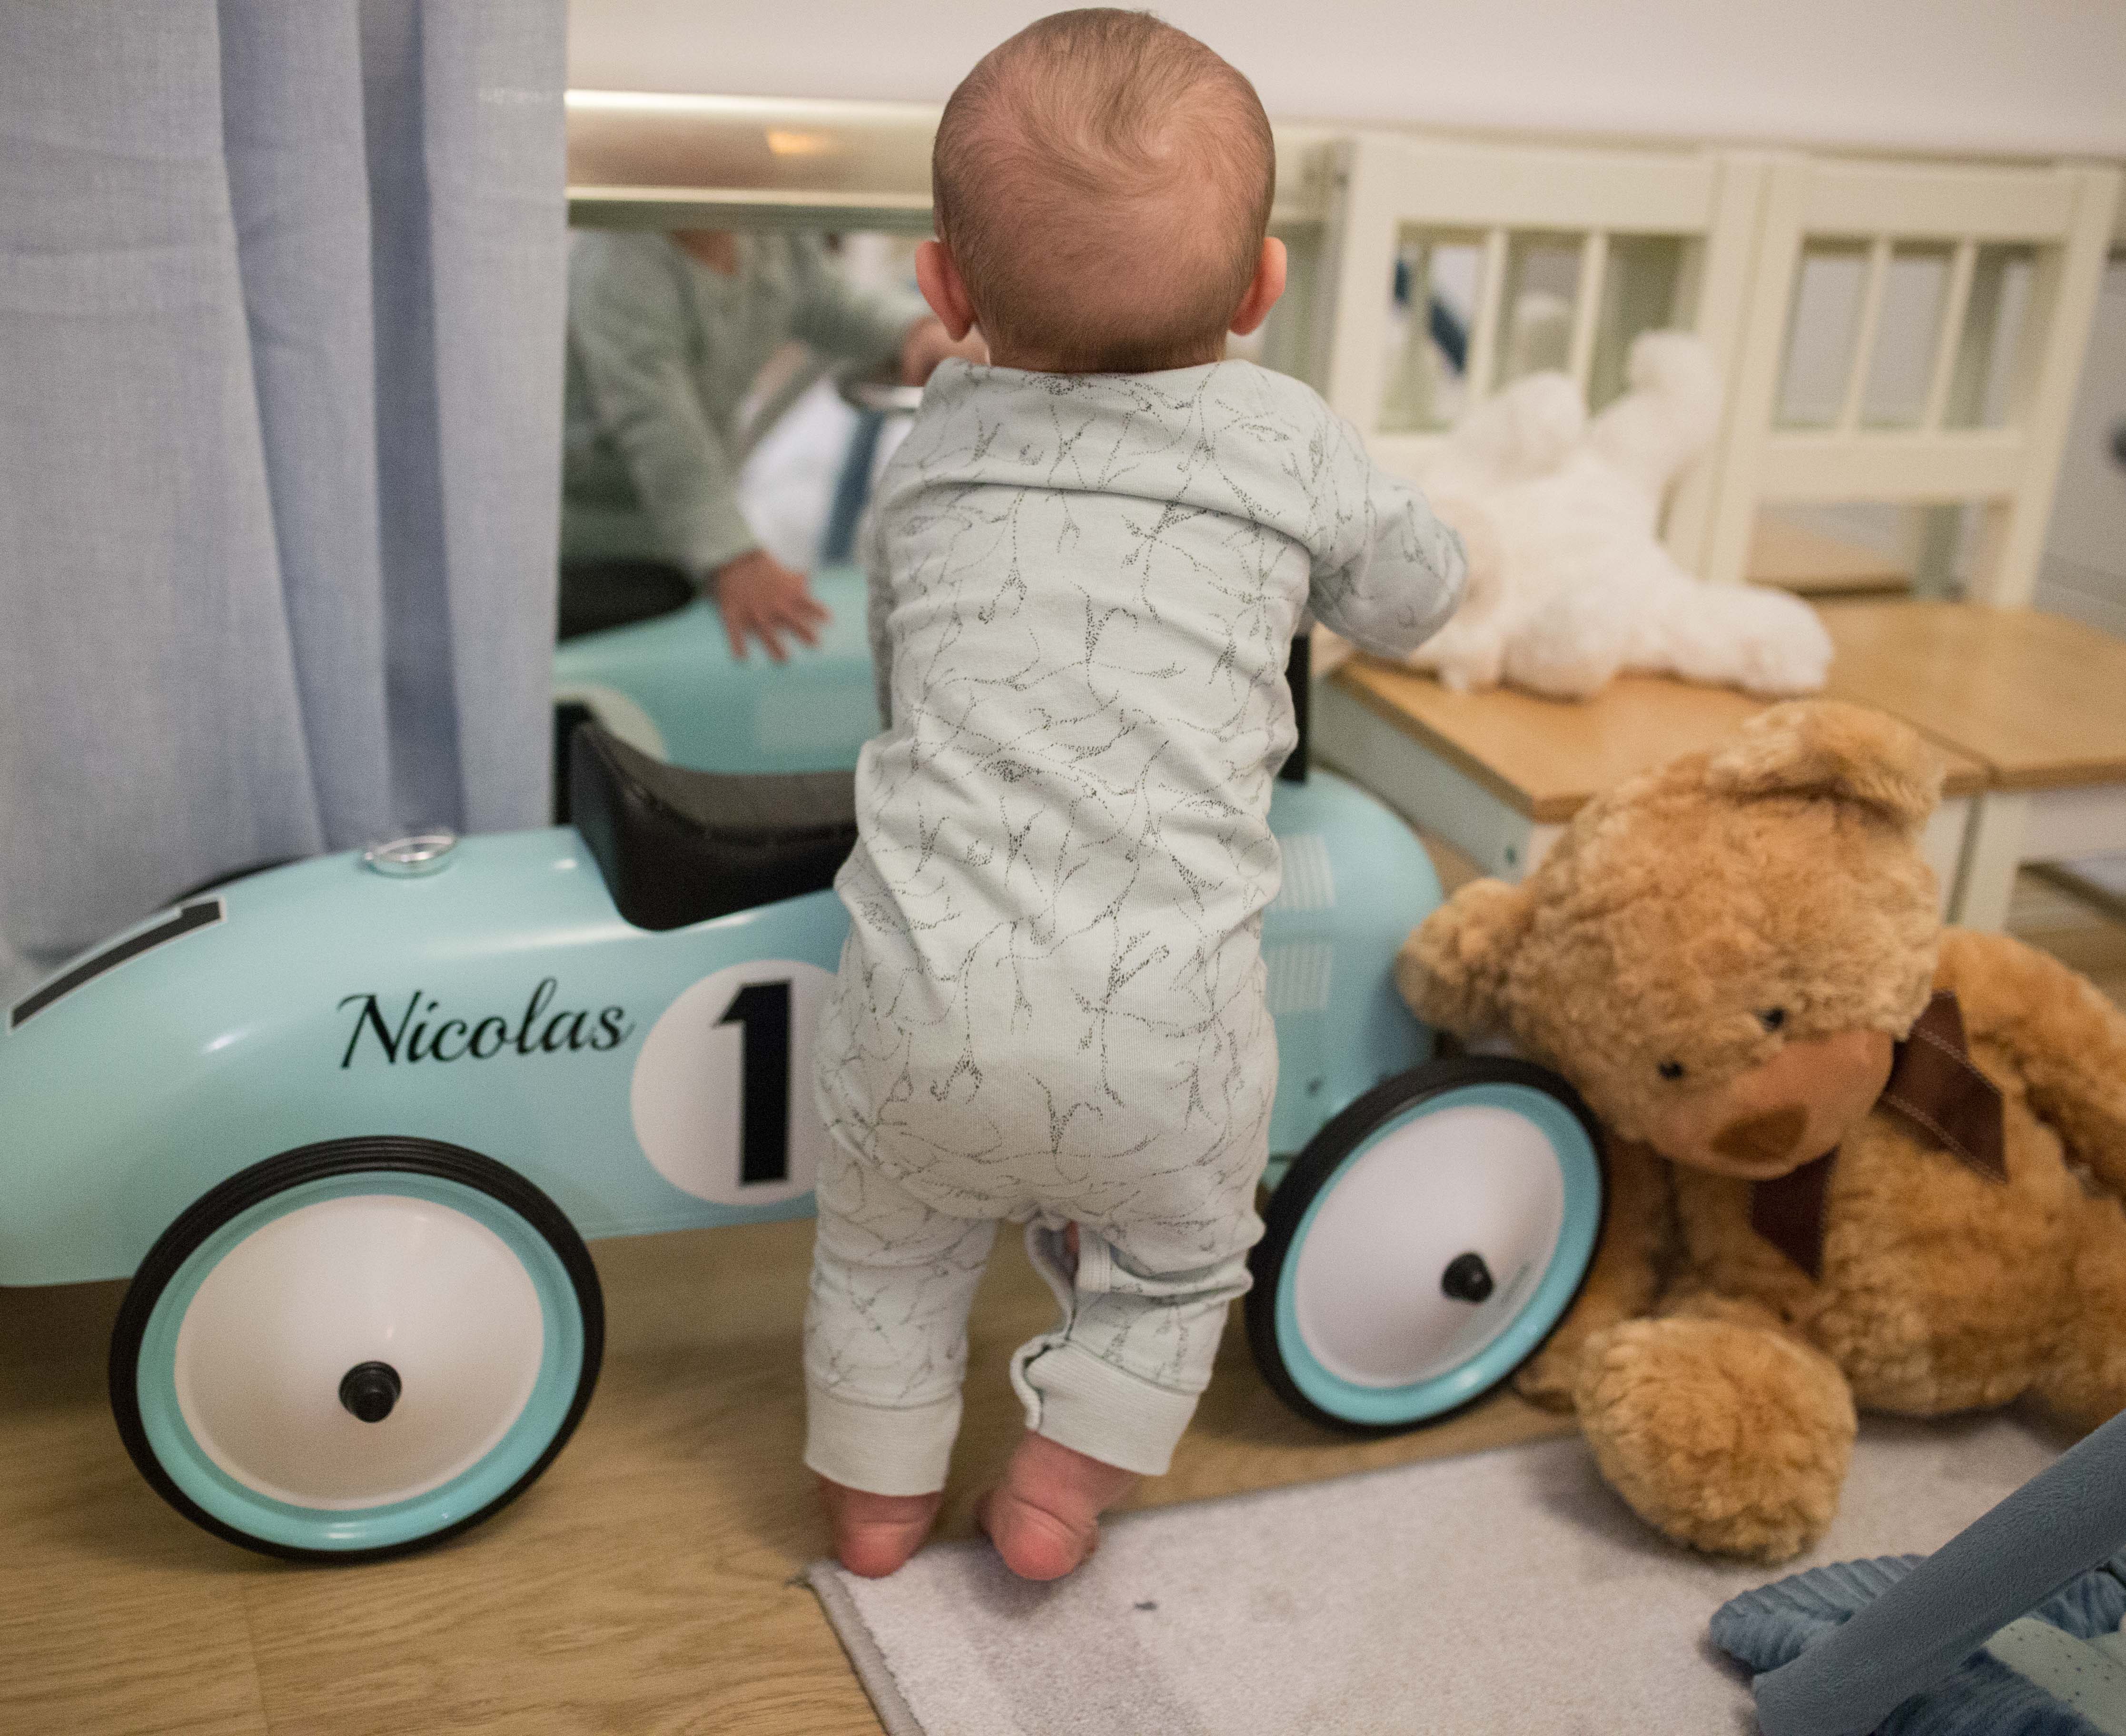 Inspiration for baby boys – My first car!